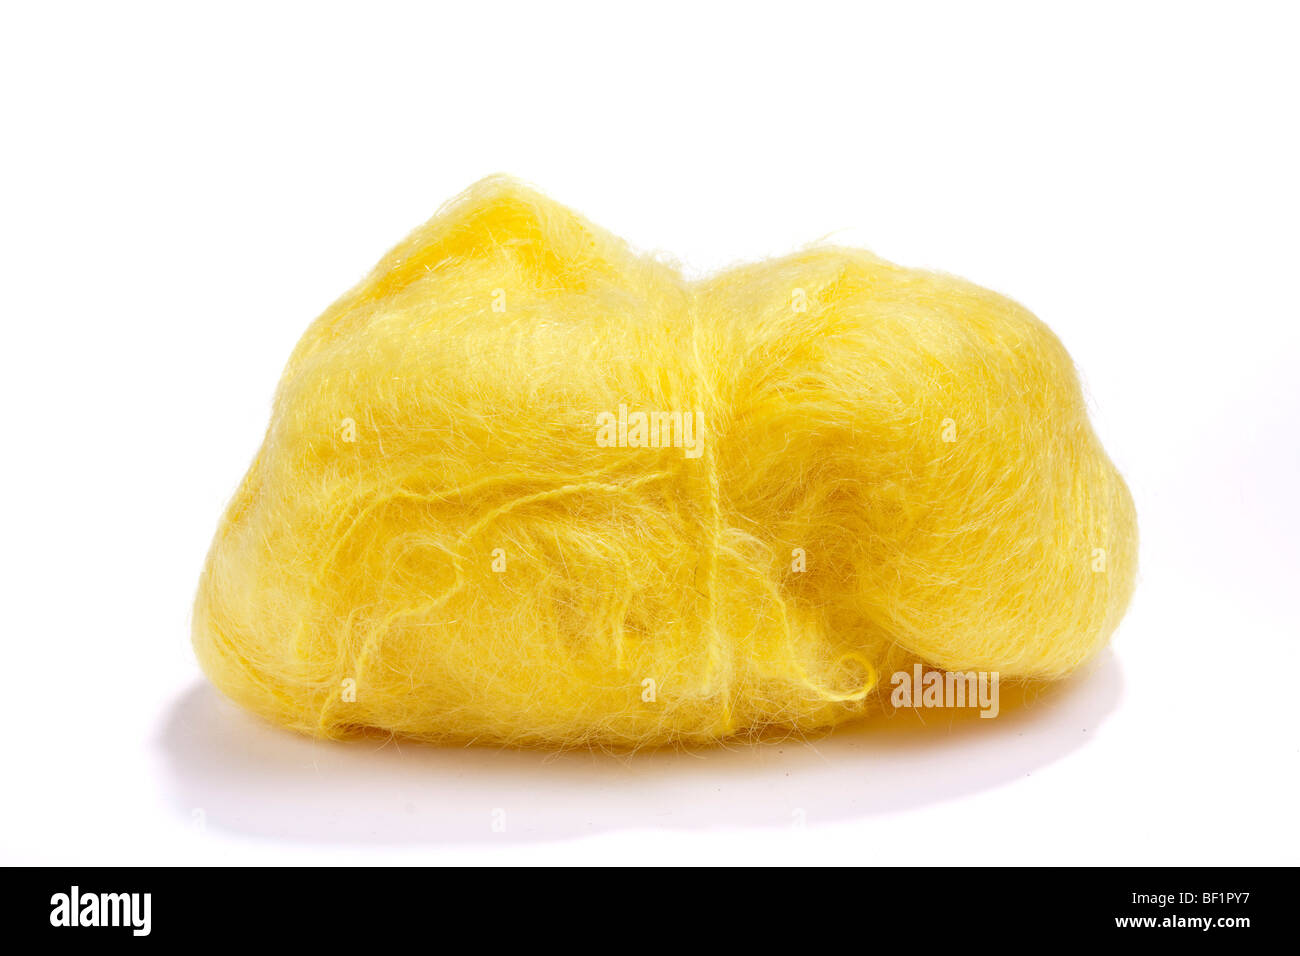 Large ball of yellow mohair wool or yarn against white background. Stock Photo